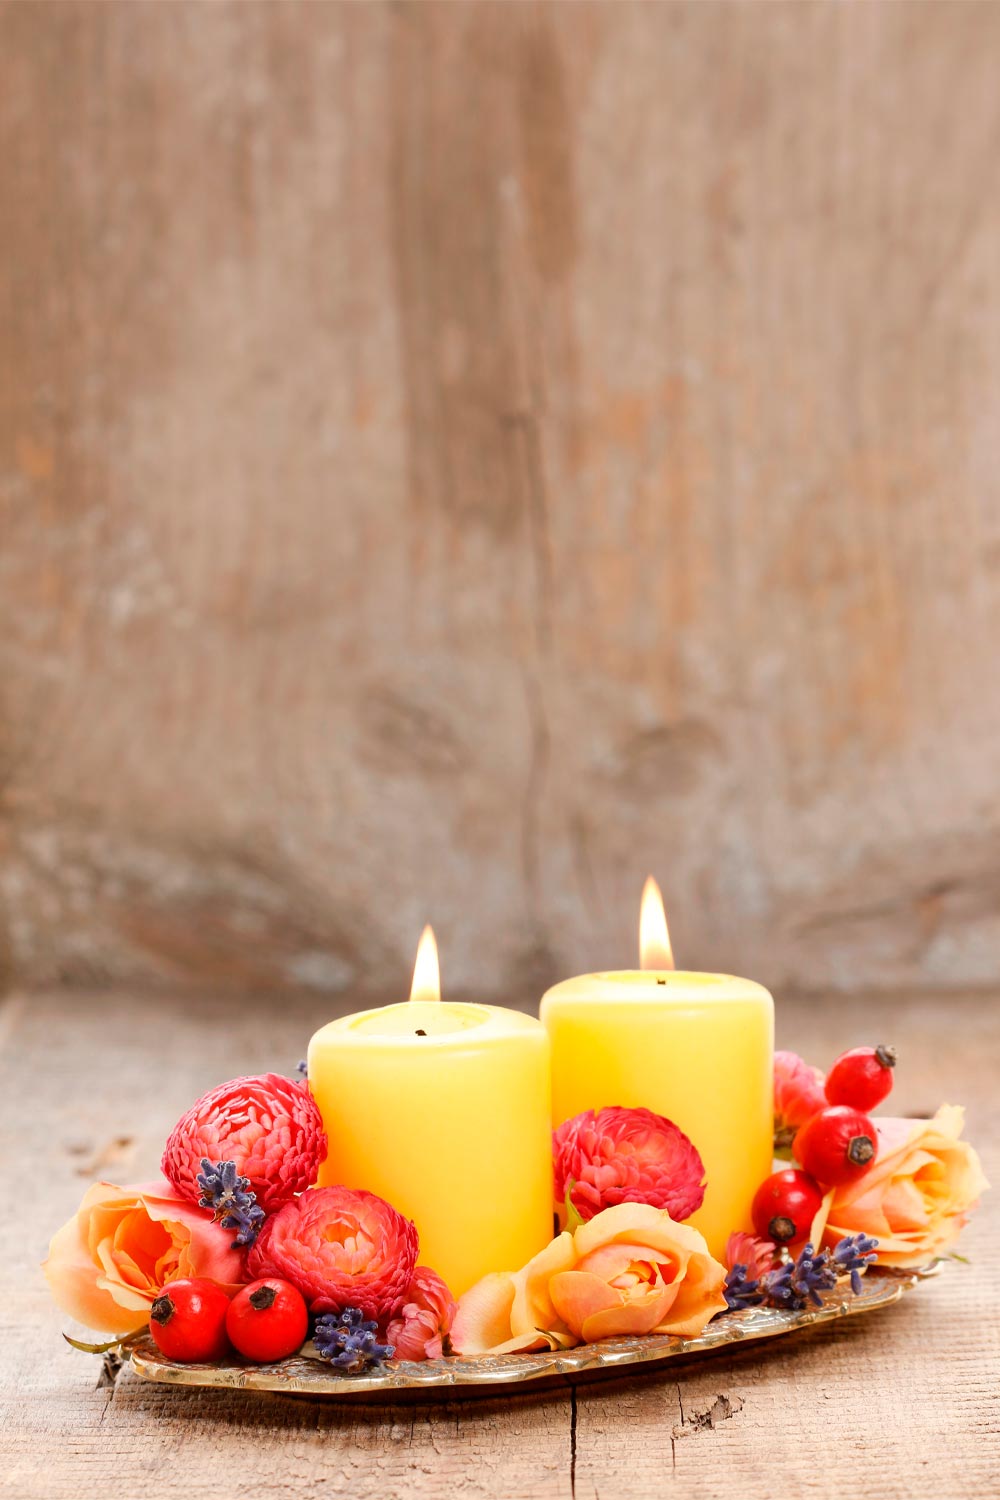 Rustic Centerpiece Ideas With Candles